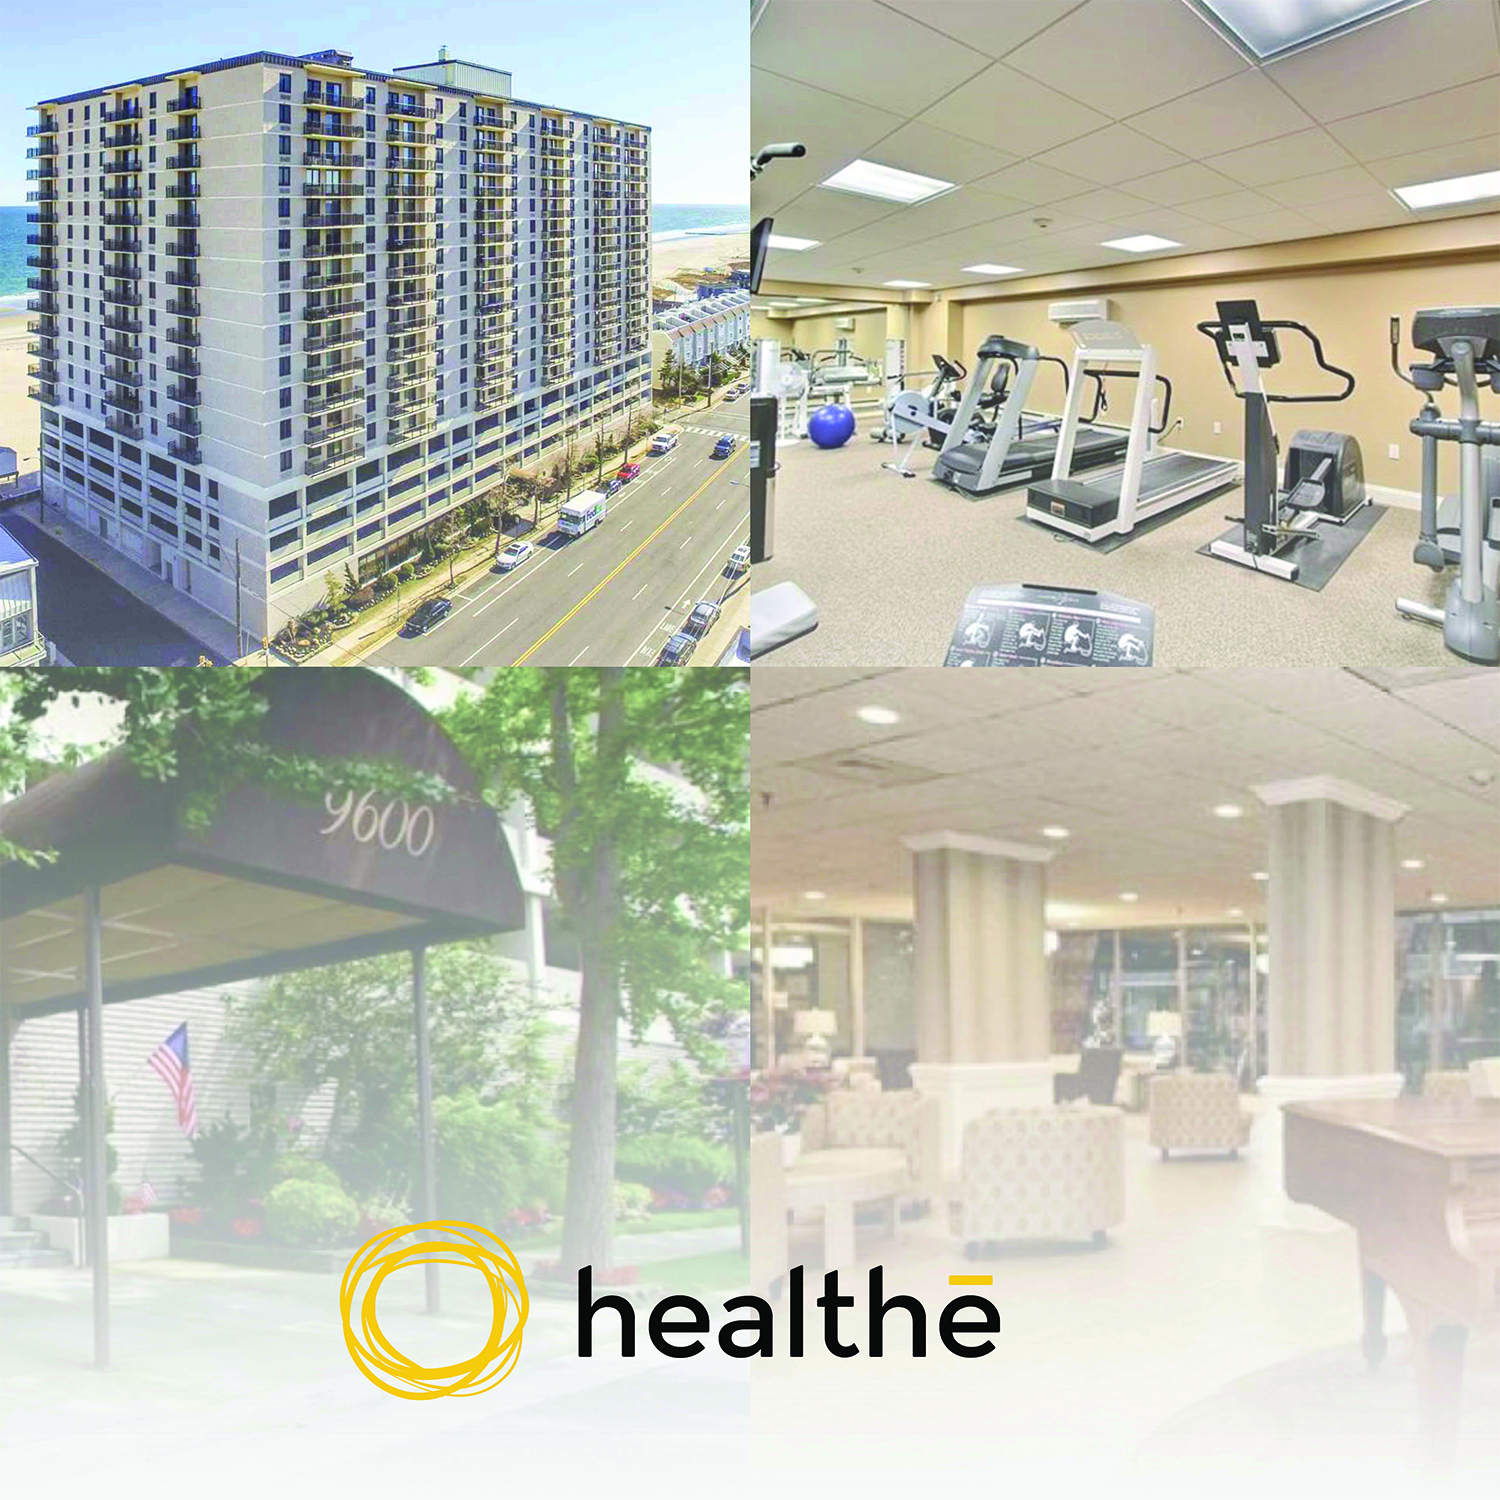 9600 Condominium Becomes First New Jersey Facility to Install Healthe's Far-UVC 222 Light Technology for Real-Time Indoor Sanitization to help to protect staff, residents and guests at ‘The Crown Jewel of the Jersey Shore’ from harmful pathogens, viruses  